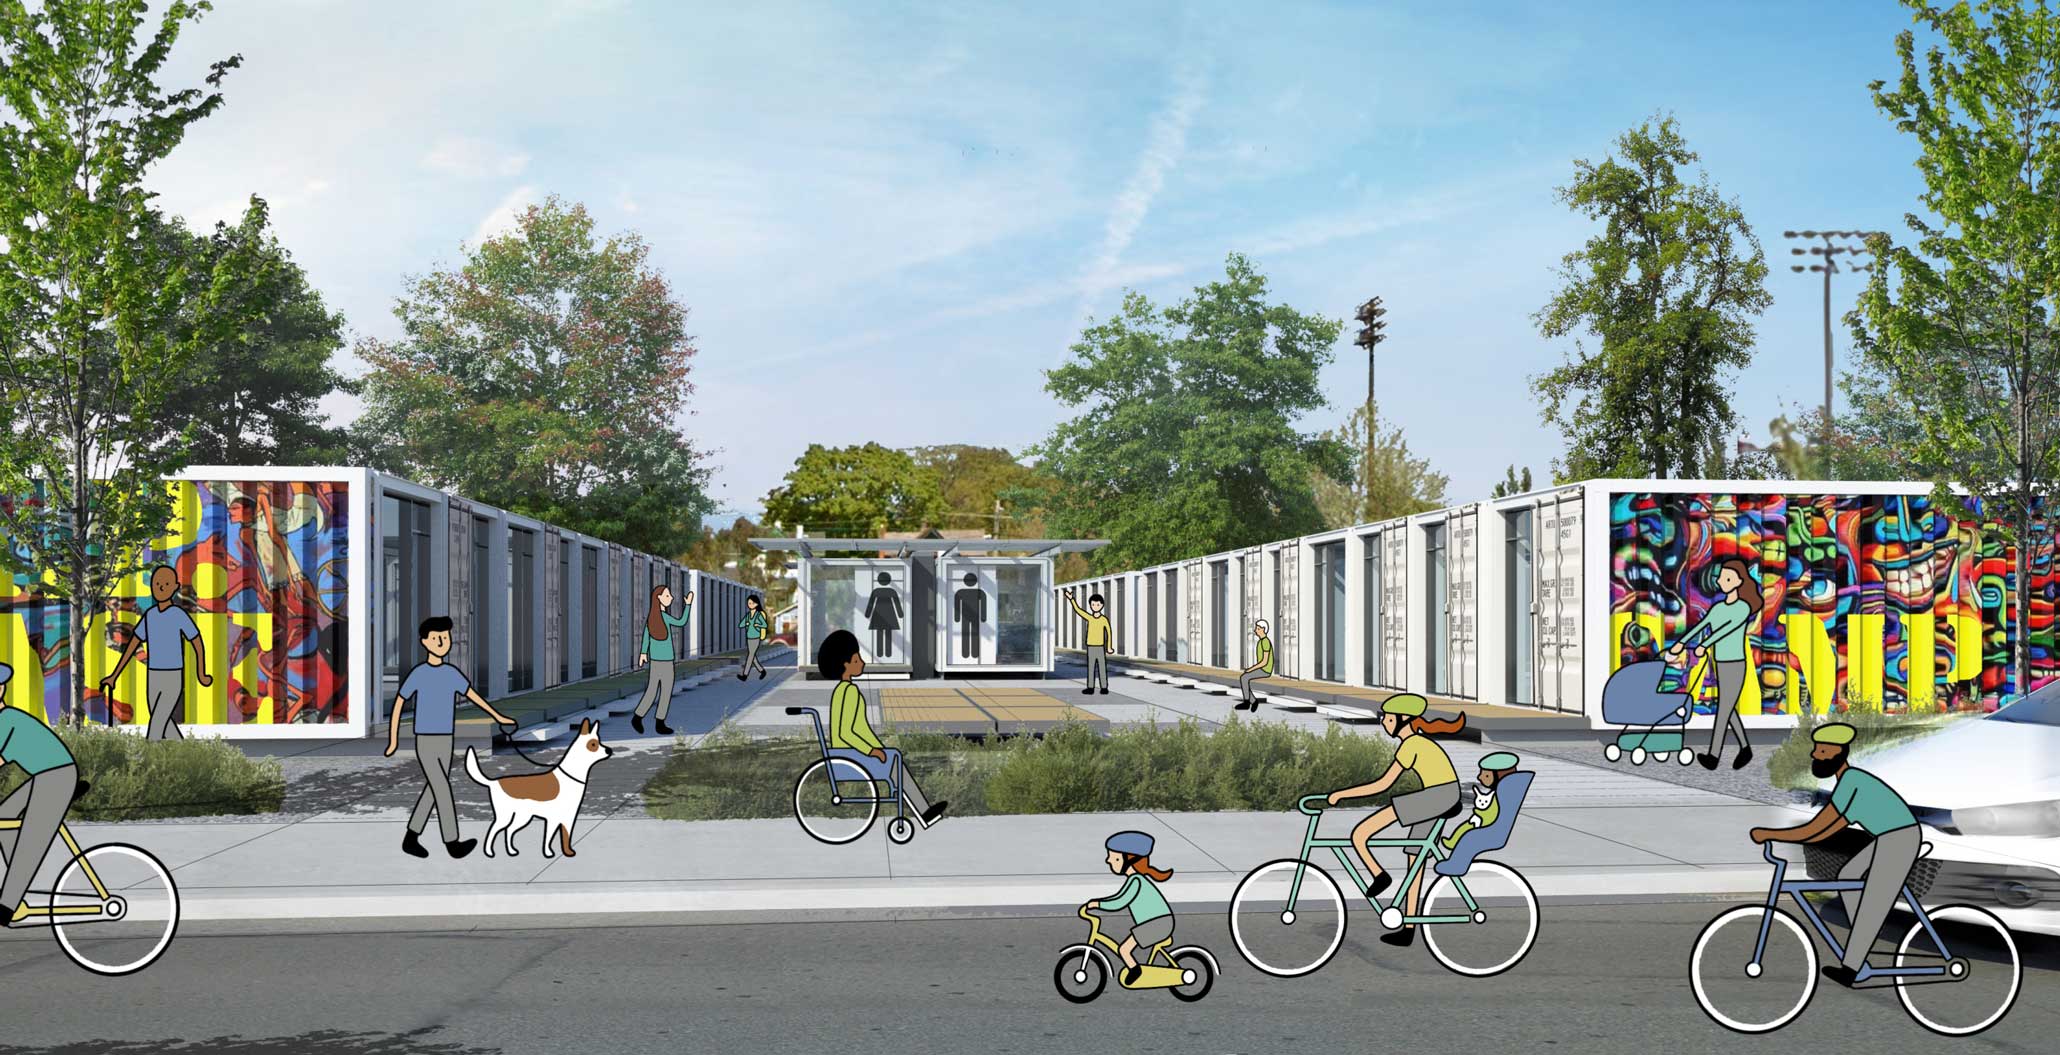 Developer, coalition pitch ‘tiny homes’ for homeless, using shipping containers